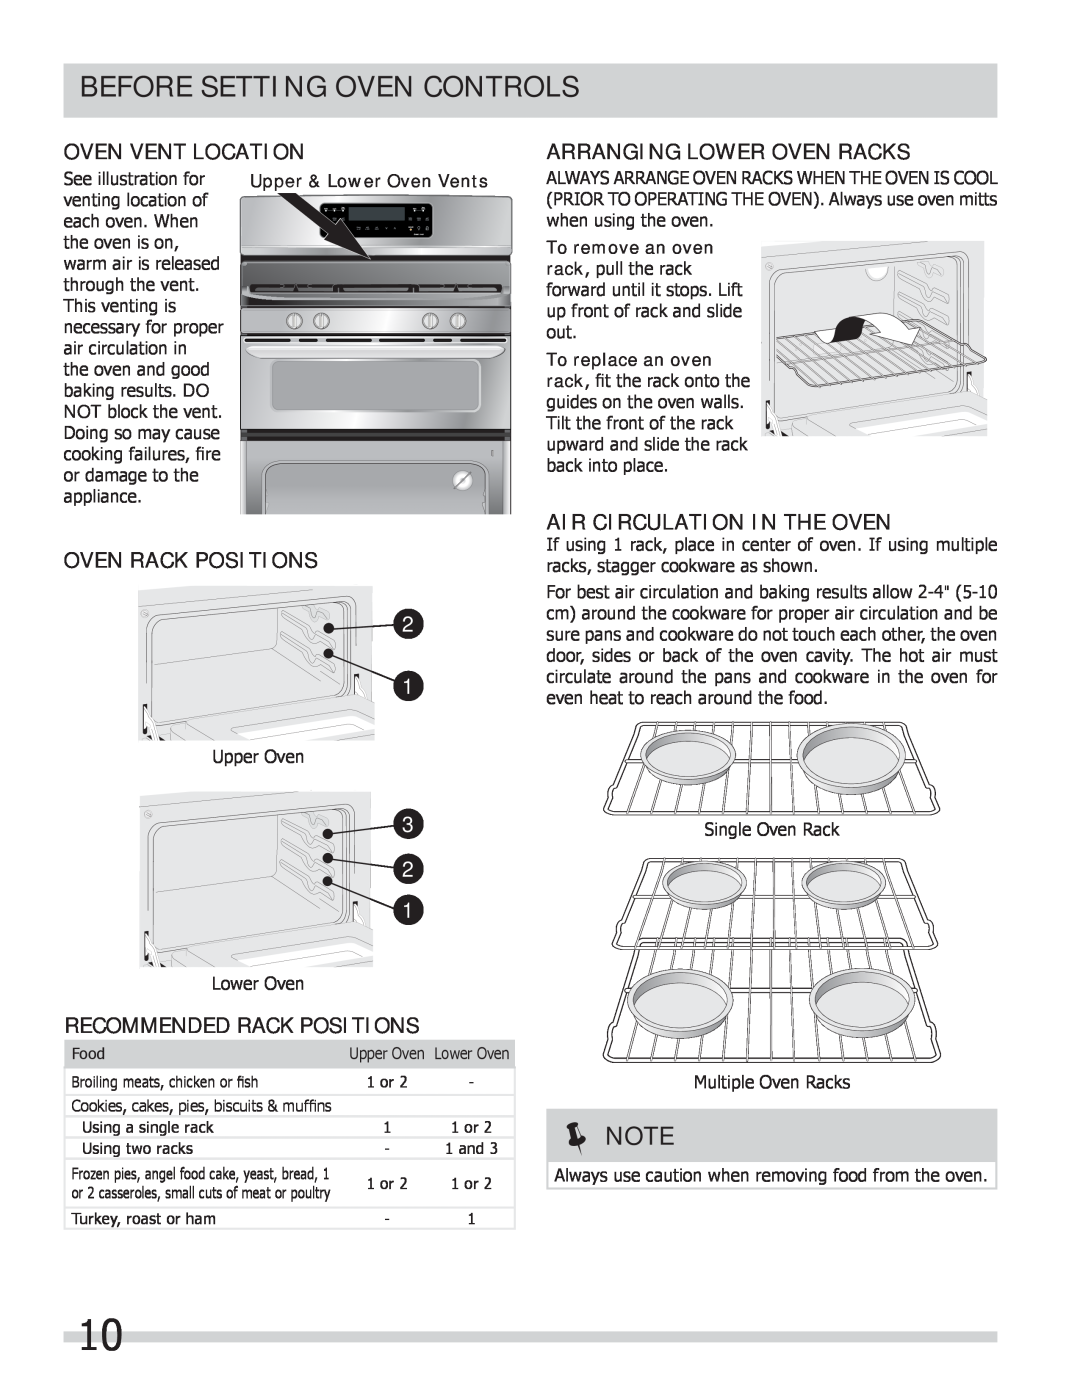 Frigidaire 318205258 Before Setting Oven Controls, Oven Vent Location, Oven Rack Positions, Recommended Rack Positions 